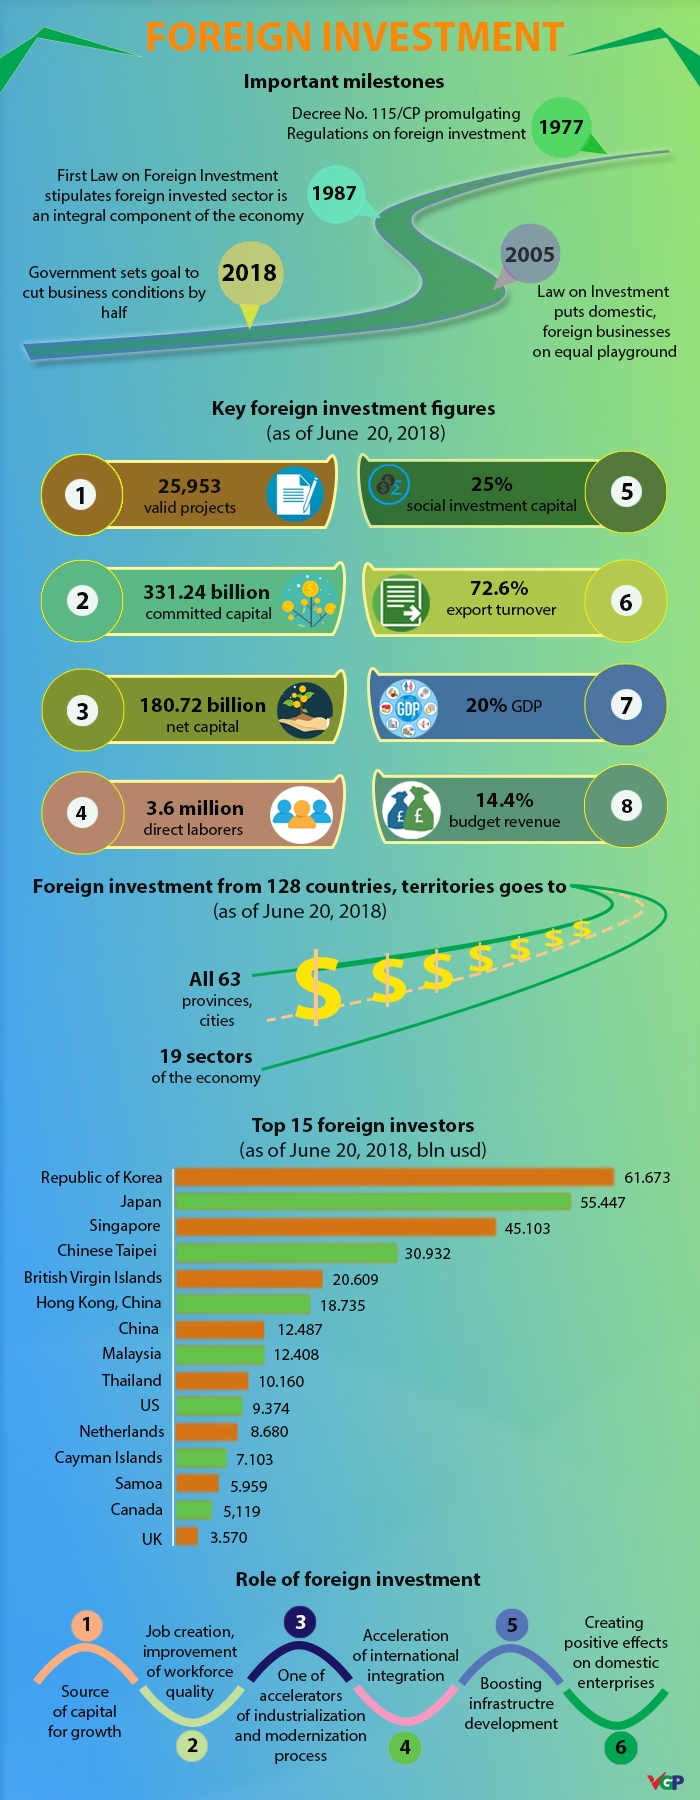 overview of foreign investment inflows since 1977